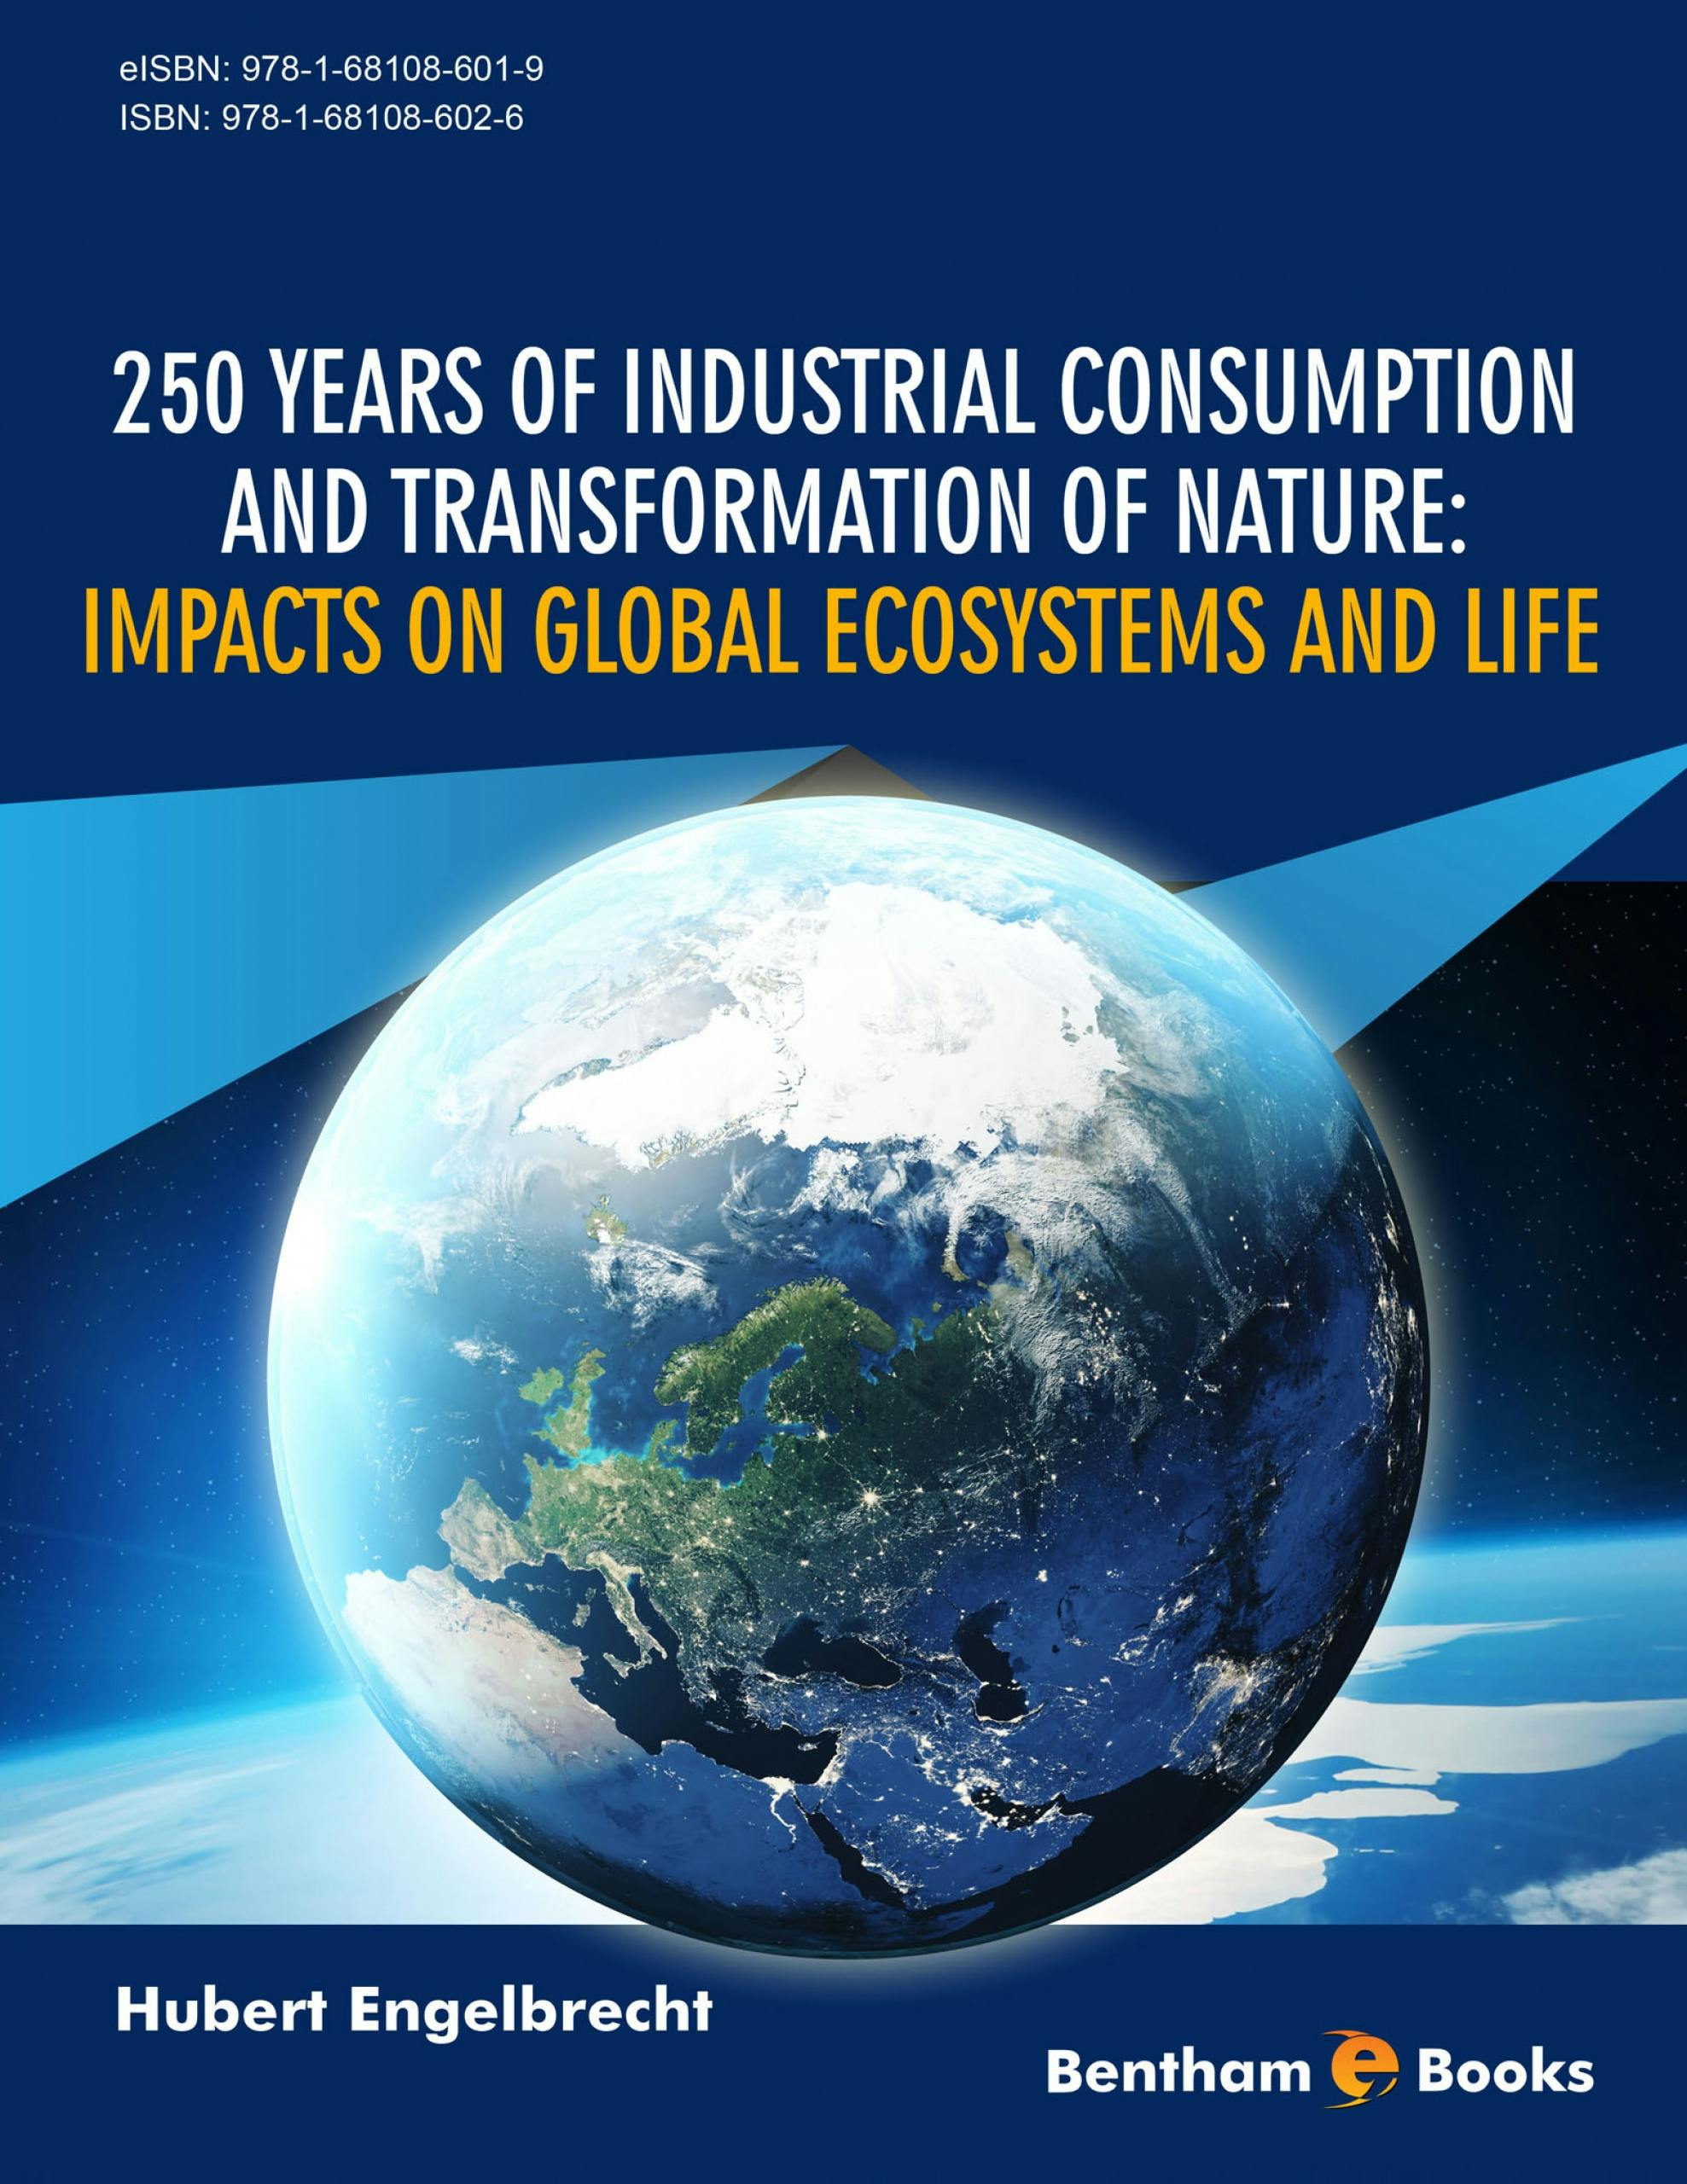 250 Years of Industrial Consumption and Transformation of Nature: Impacts on Global Ecosystems and Life - Hubert Engelbrecht